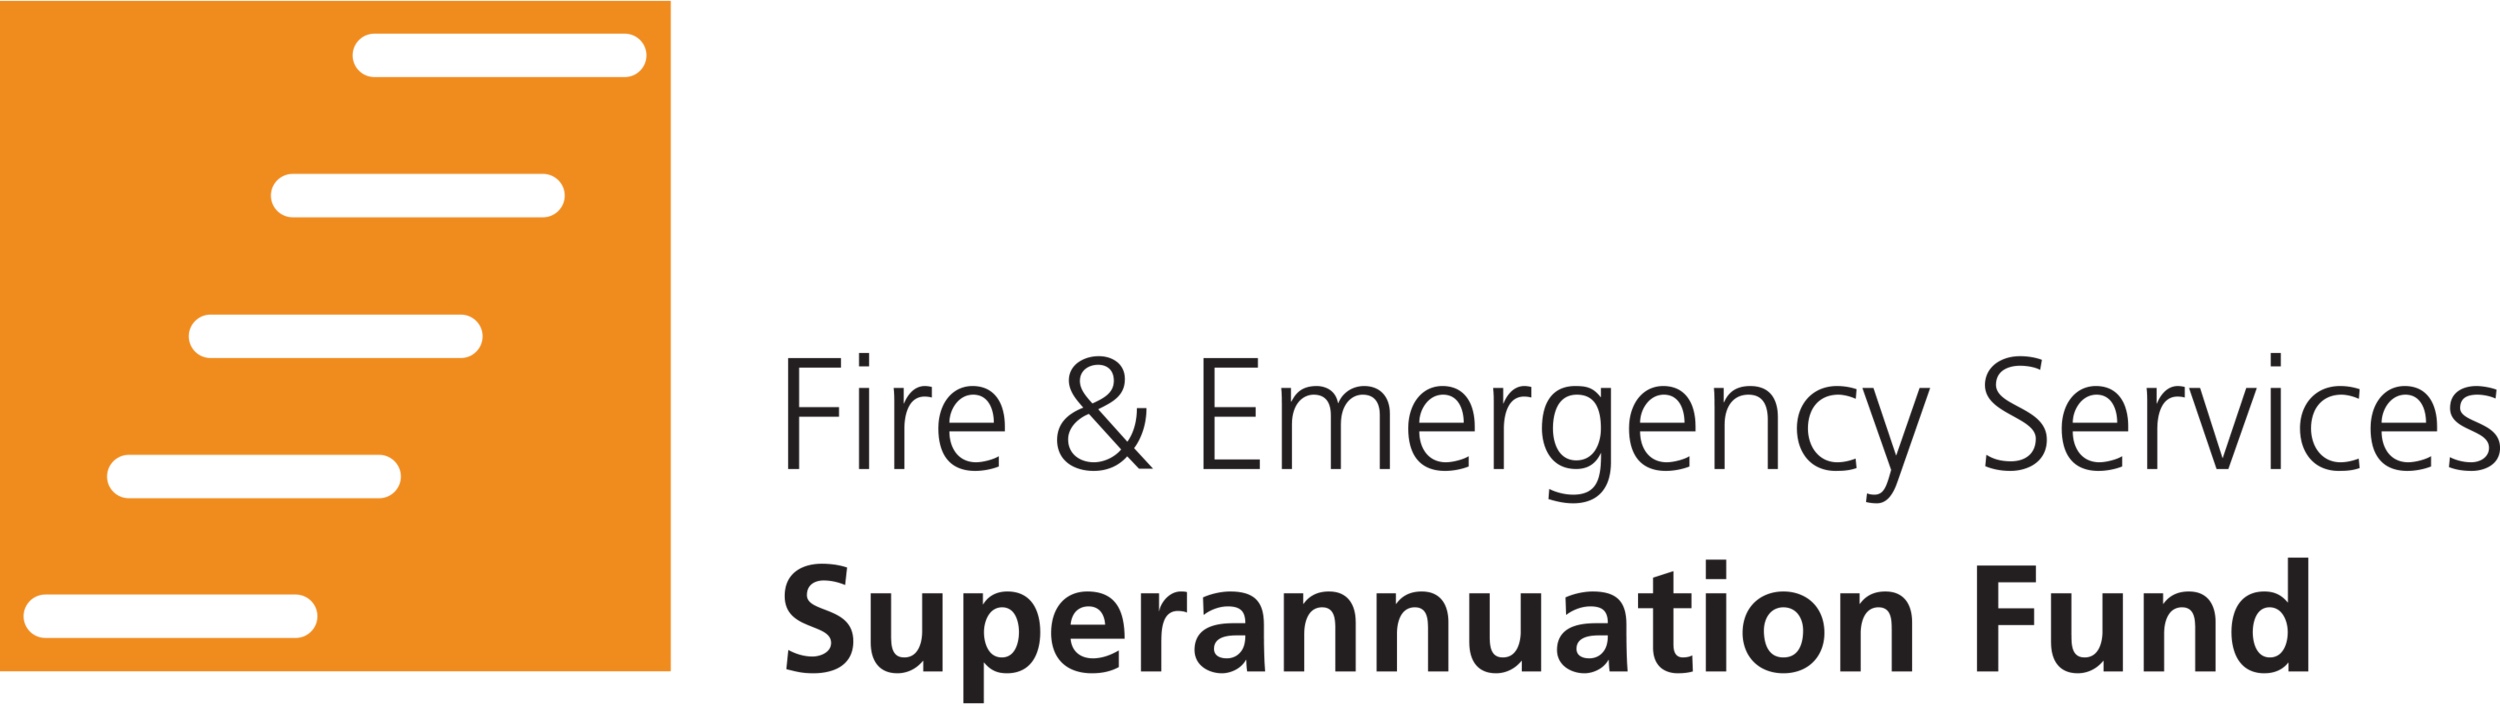 Fire and Emergency Services Superannuation Fund